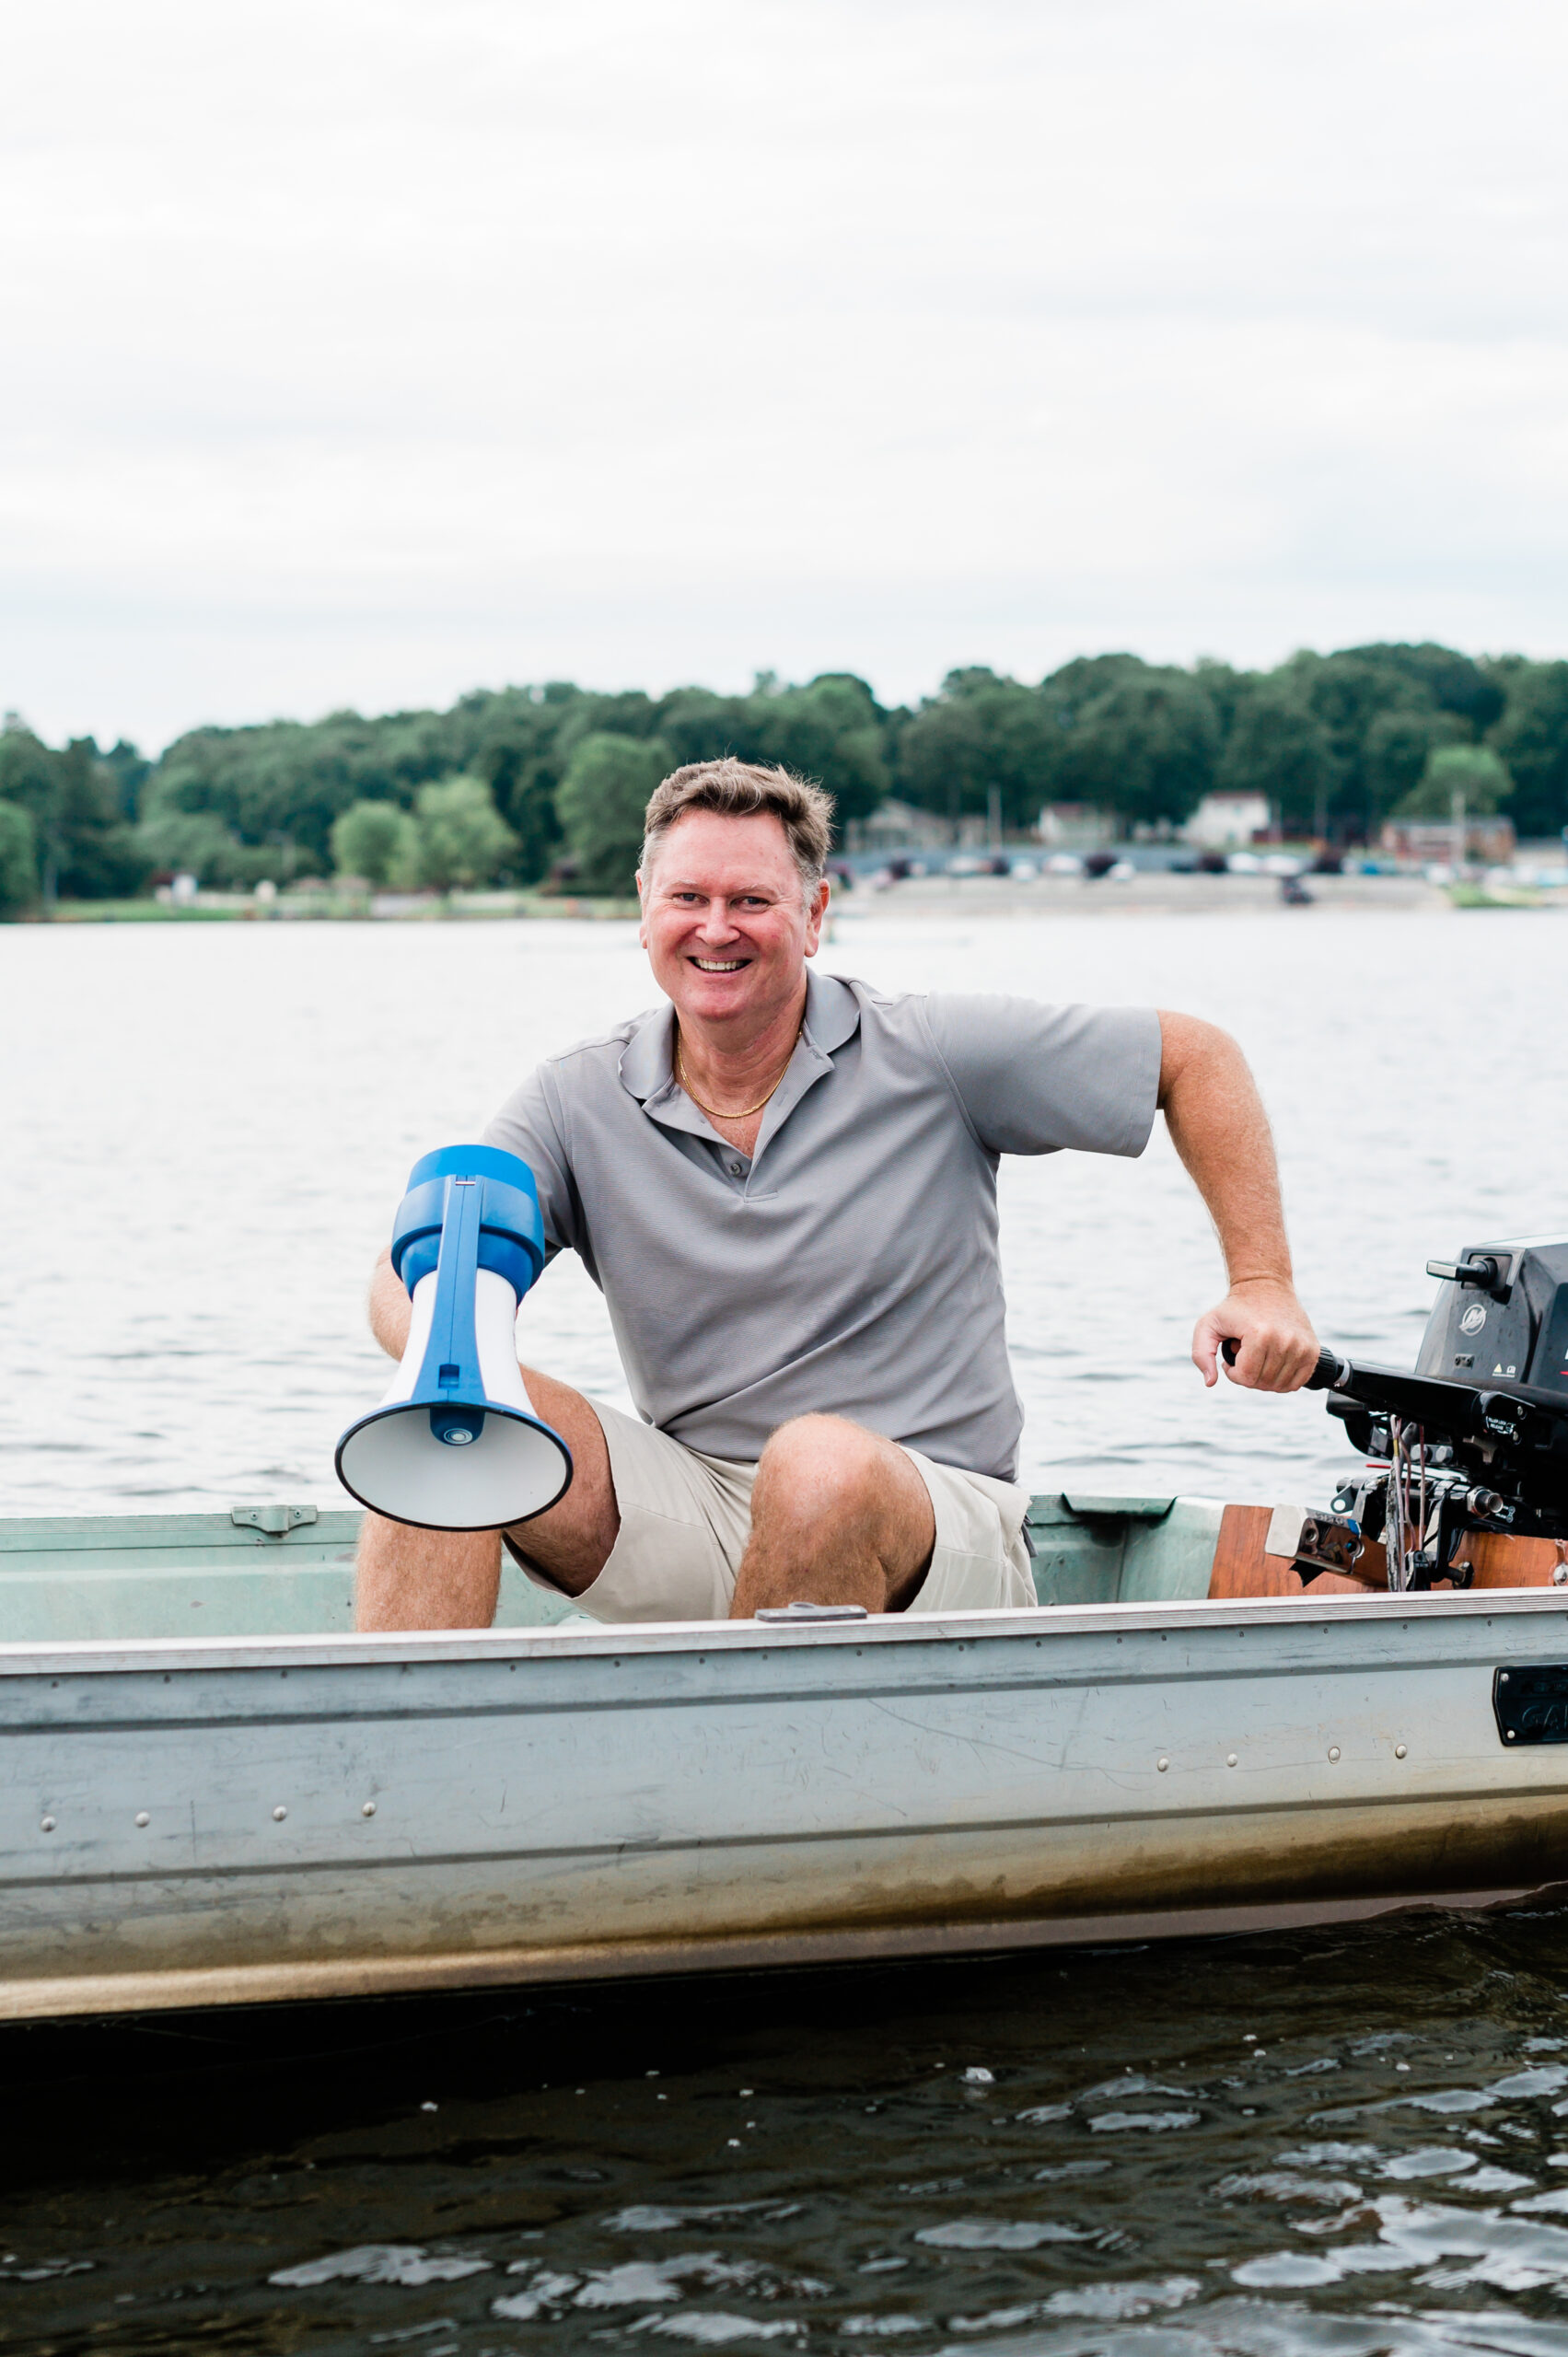 Gene Kininmonth, Founder of Triad United Rowing, sits in a boat on Oak Hollow Lake in High Point, NC.